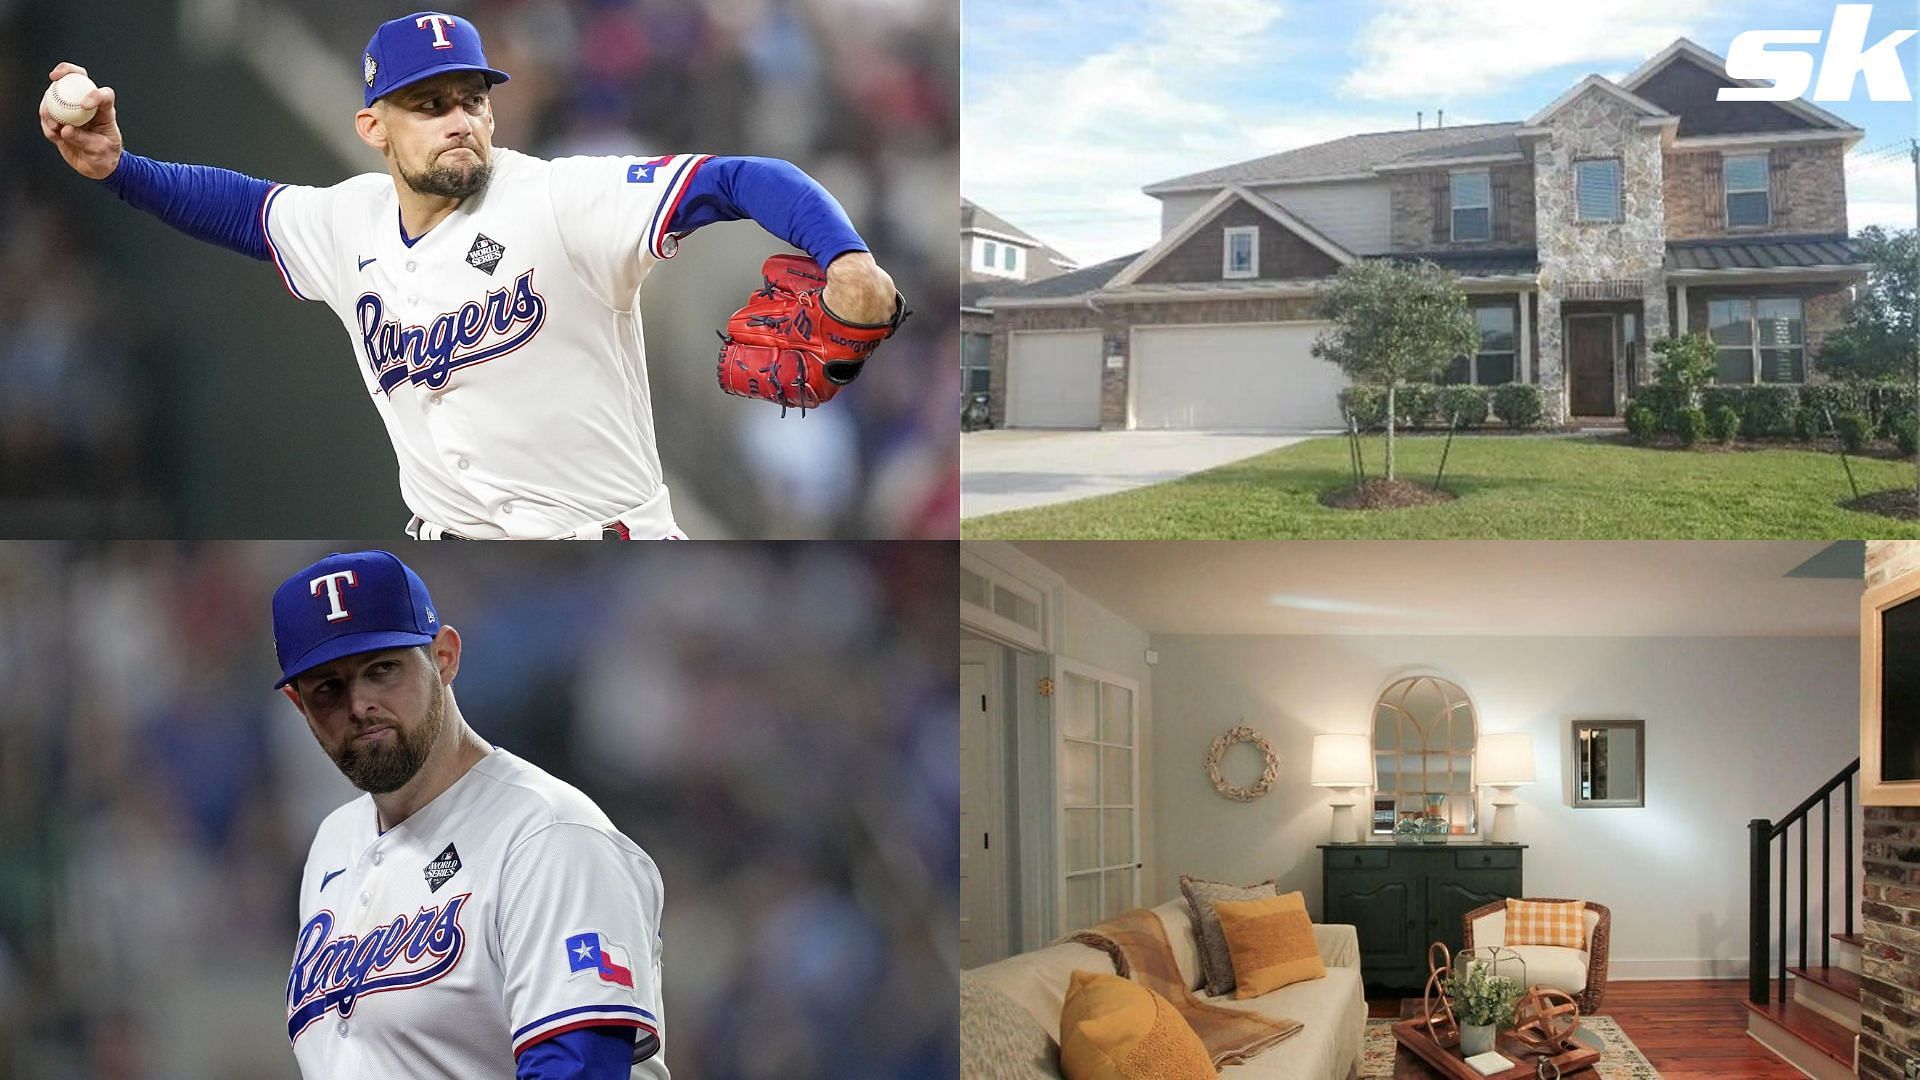 Top right: Nathan Eovaldi&#039;s home in Friendswood, Bottom right: Jordan Montgomery&#039;s South Carolina residence (Source: Realtor.com)